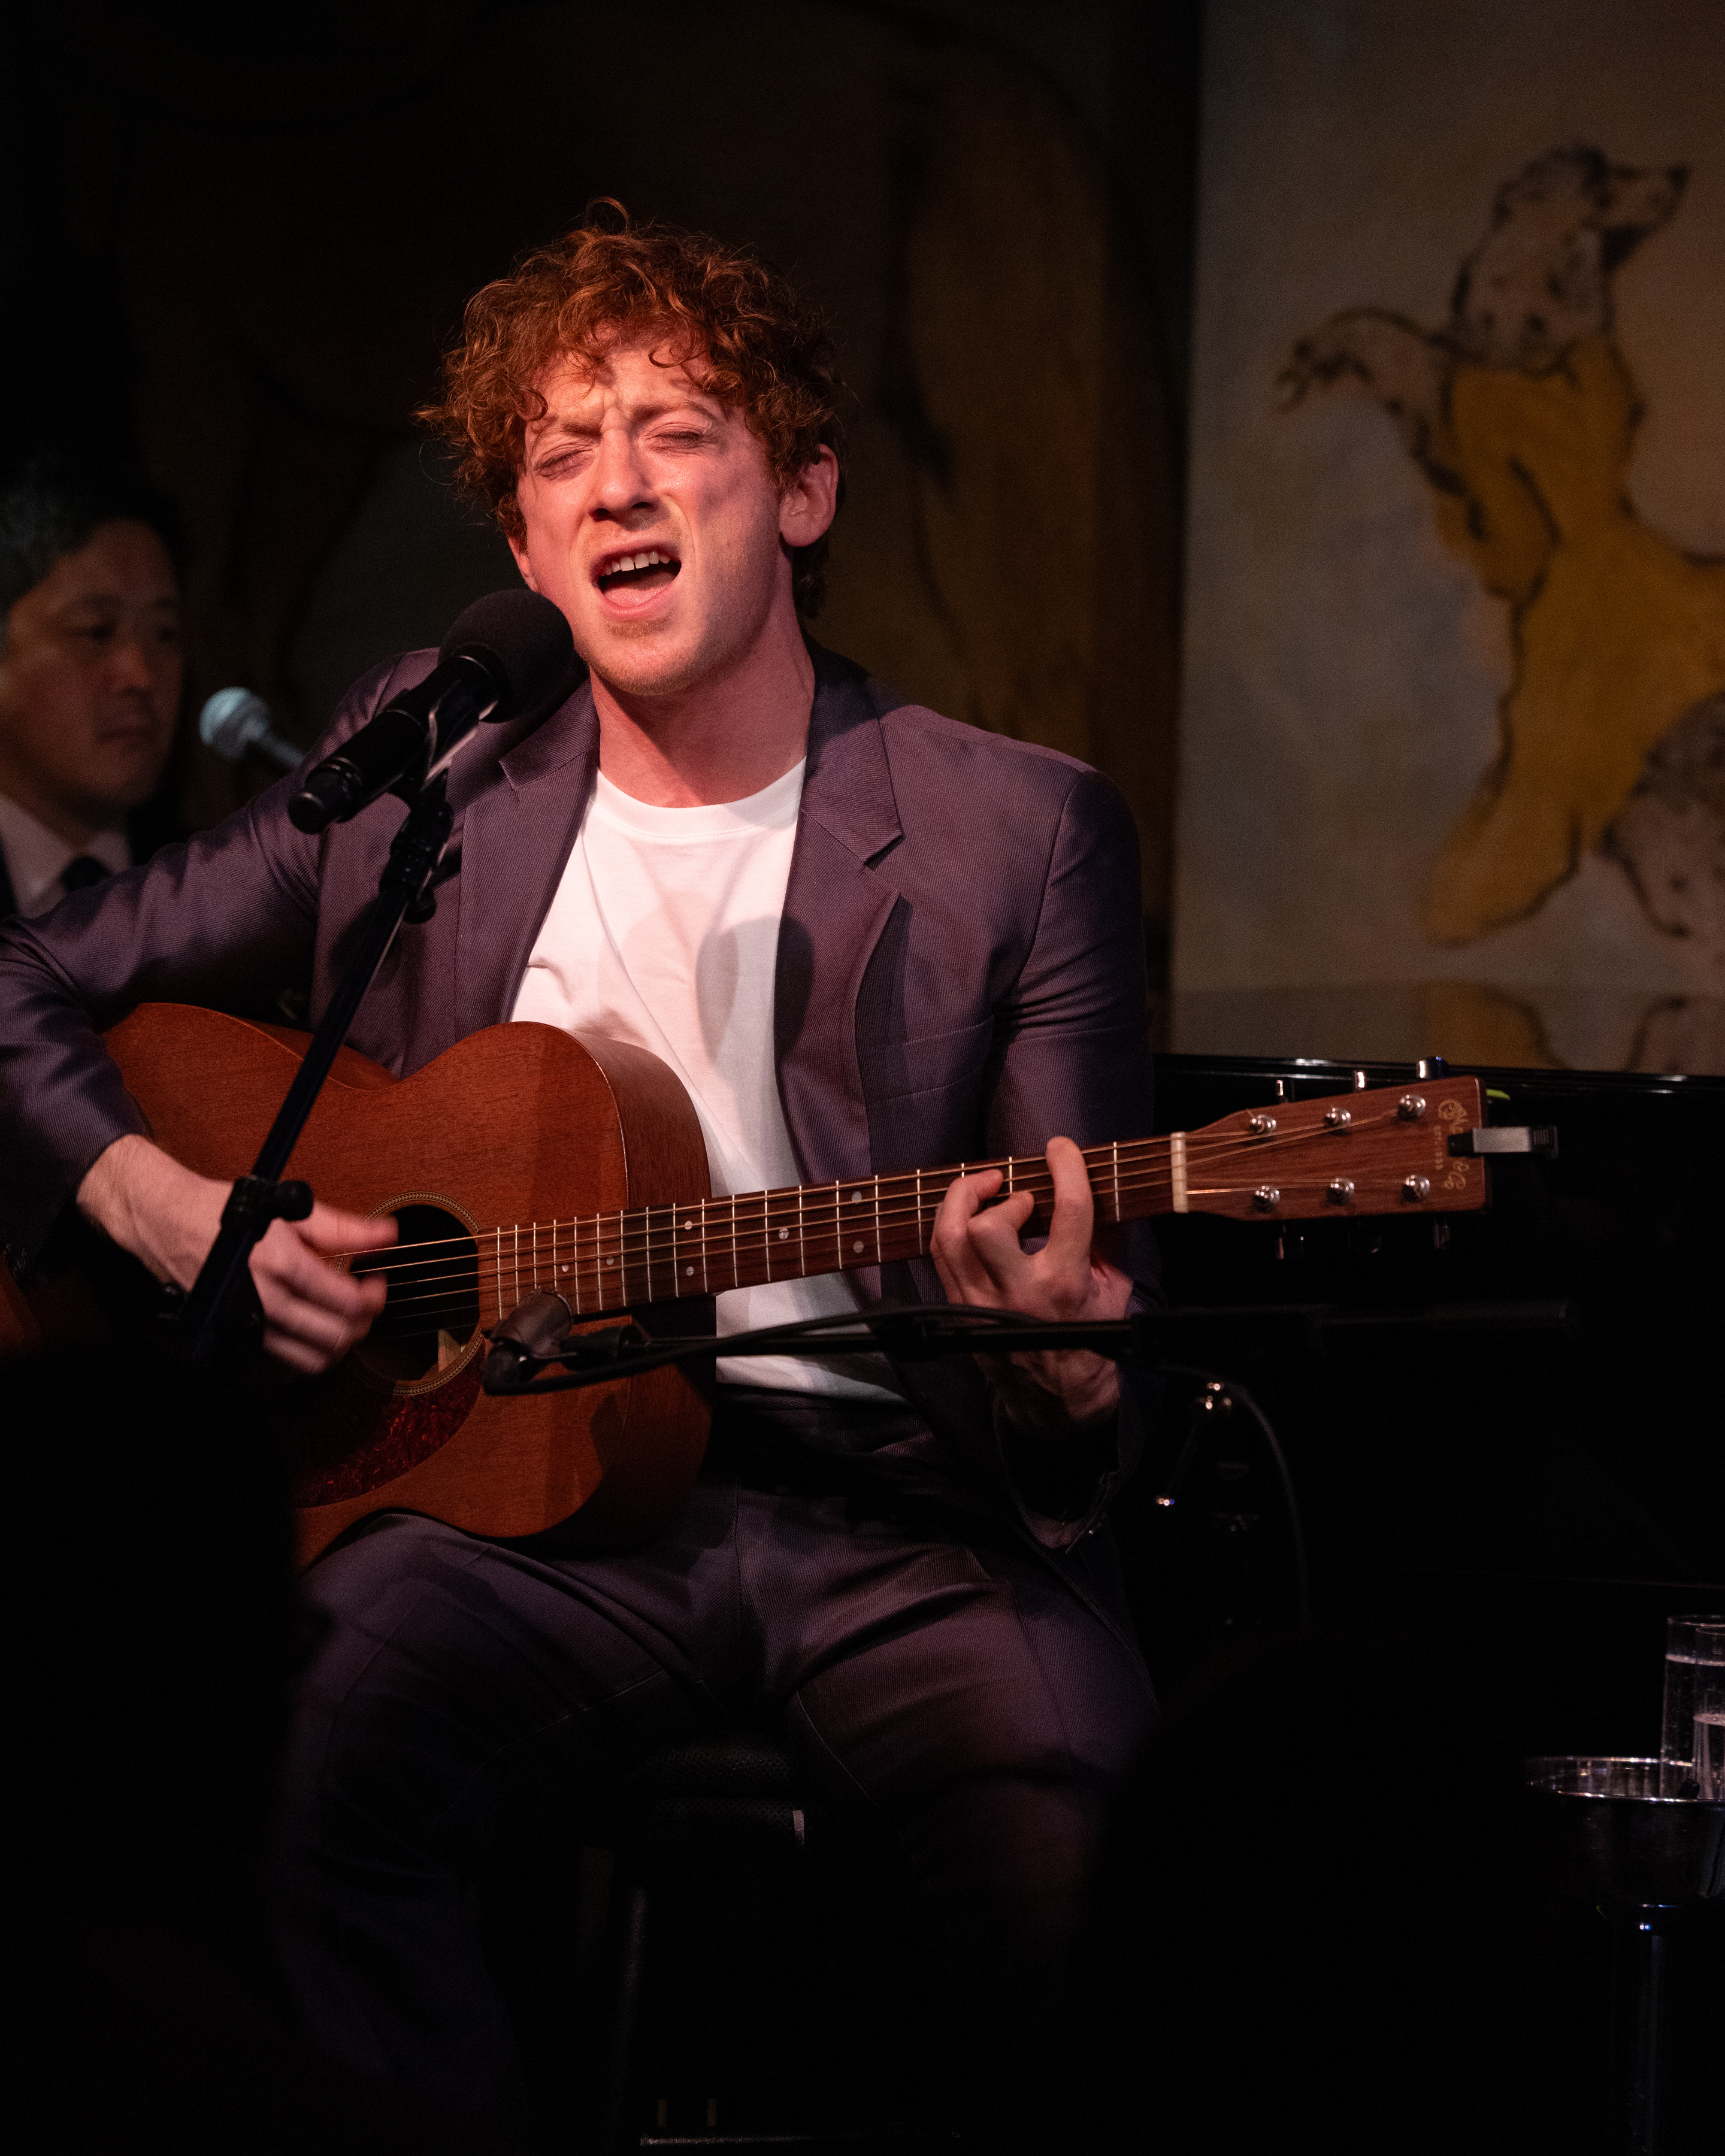 Ethan will be performing at Café Carlyle from now until June 1